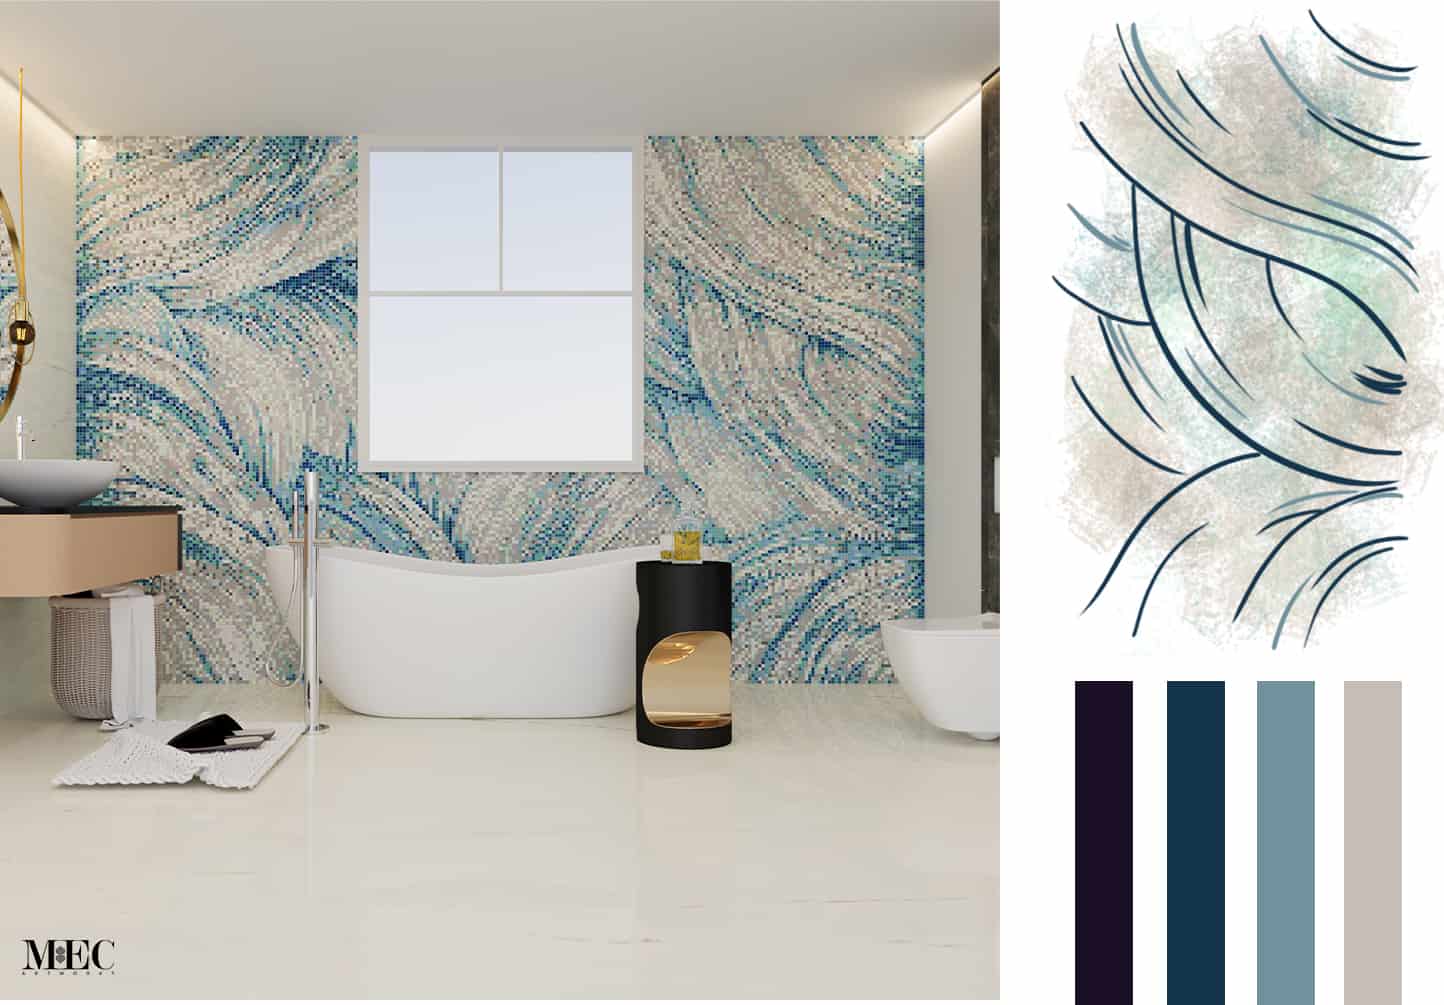 A collage of two images of a shower wall with blue and white mosaics. The left image shows a white bathtub with a curved faucet and shower head, and the right image shows the color palette and design of the mosaics.